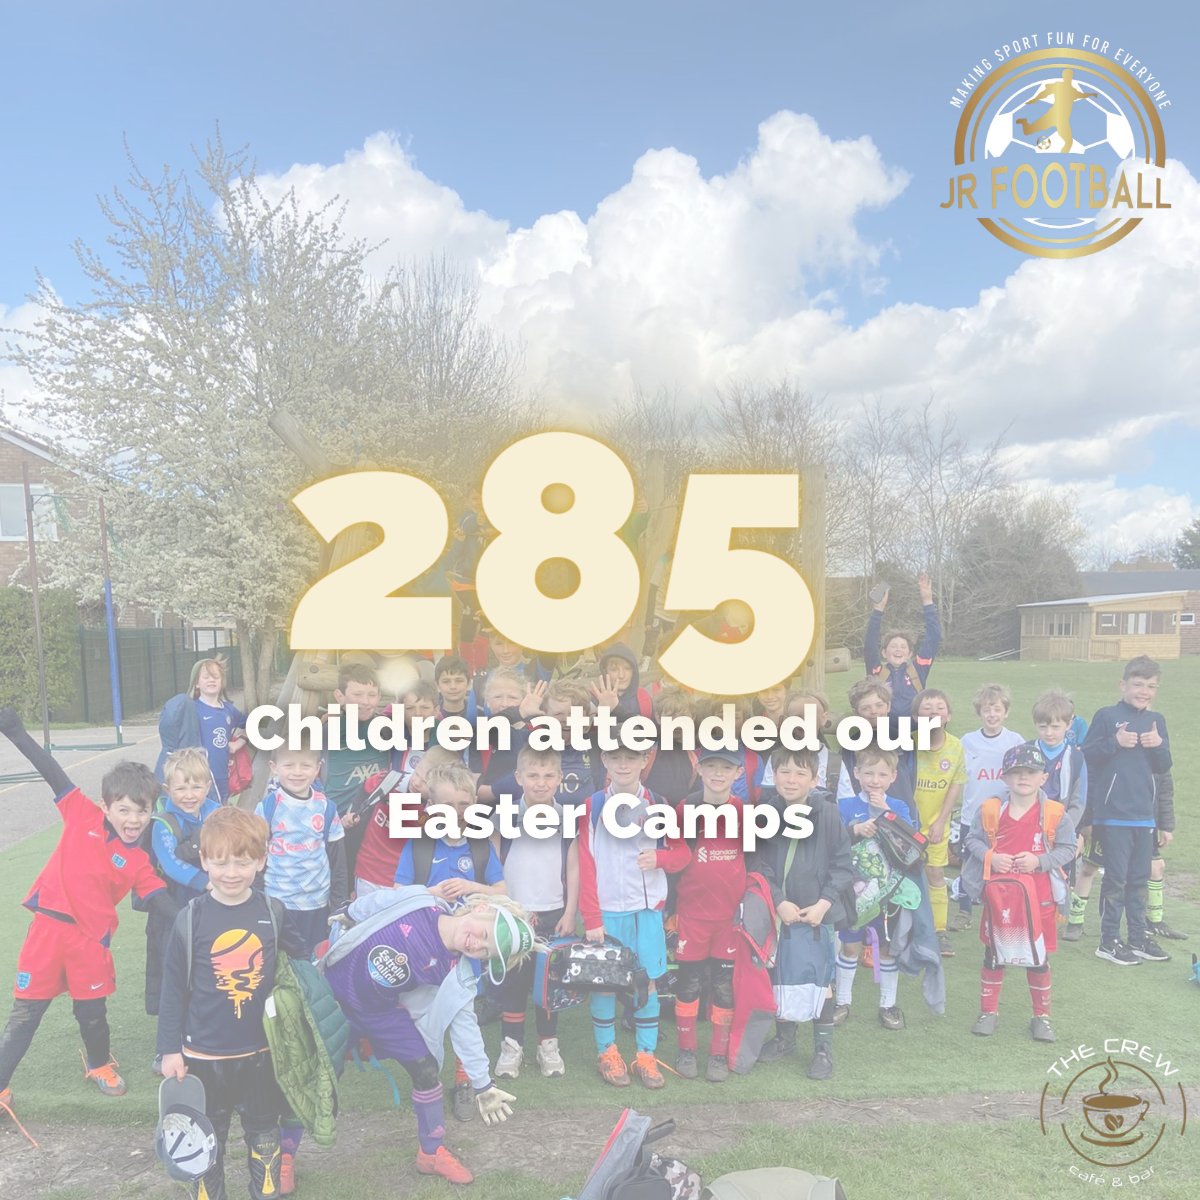 We're thrilled to announce that our Easter camps were a huge success with a whopping 285 kids attending our multi-sports and football camps!

Thank you to everyone who made these camps such a success. See you soon!

#JRFootball #MultiSports #FootballCamps #HalfTermCamps